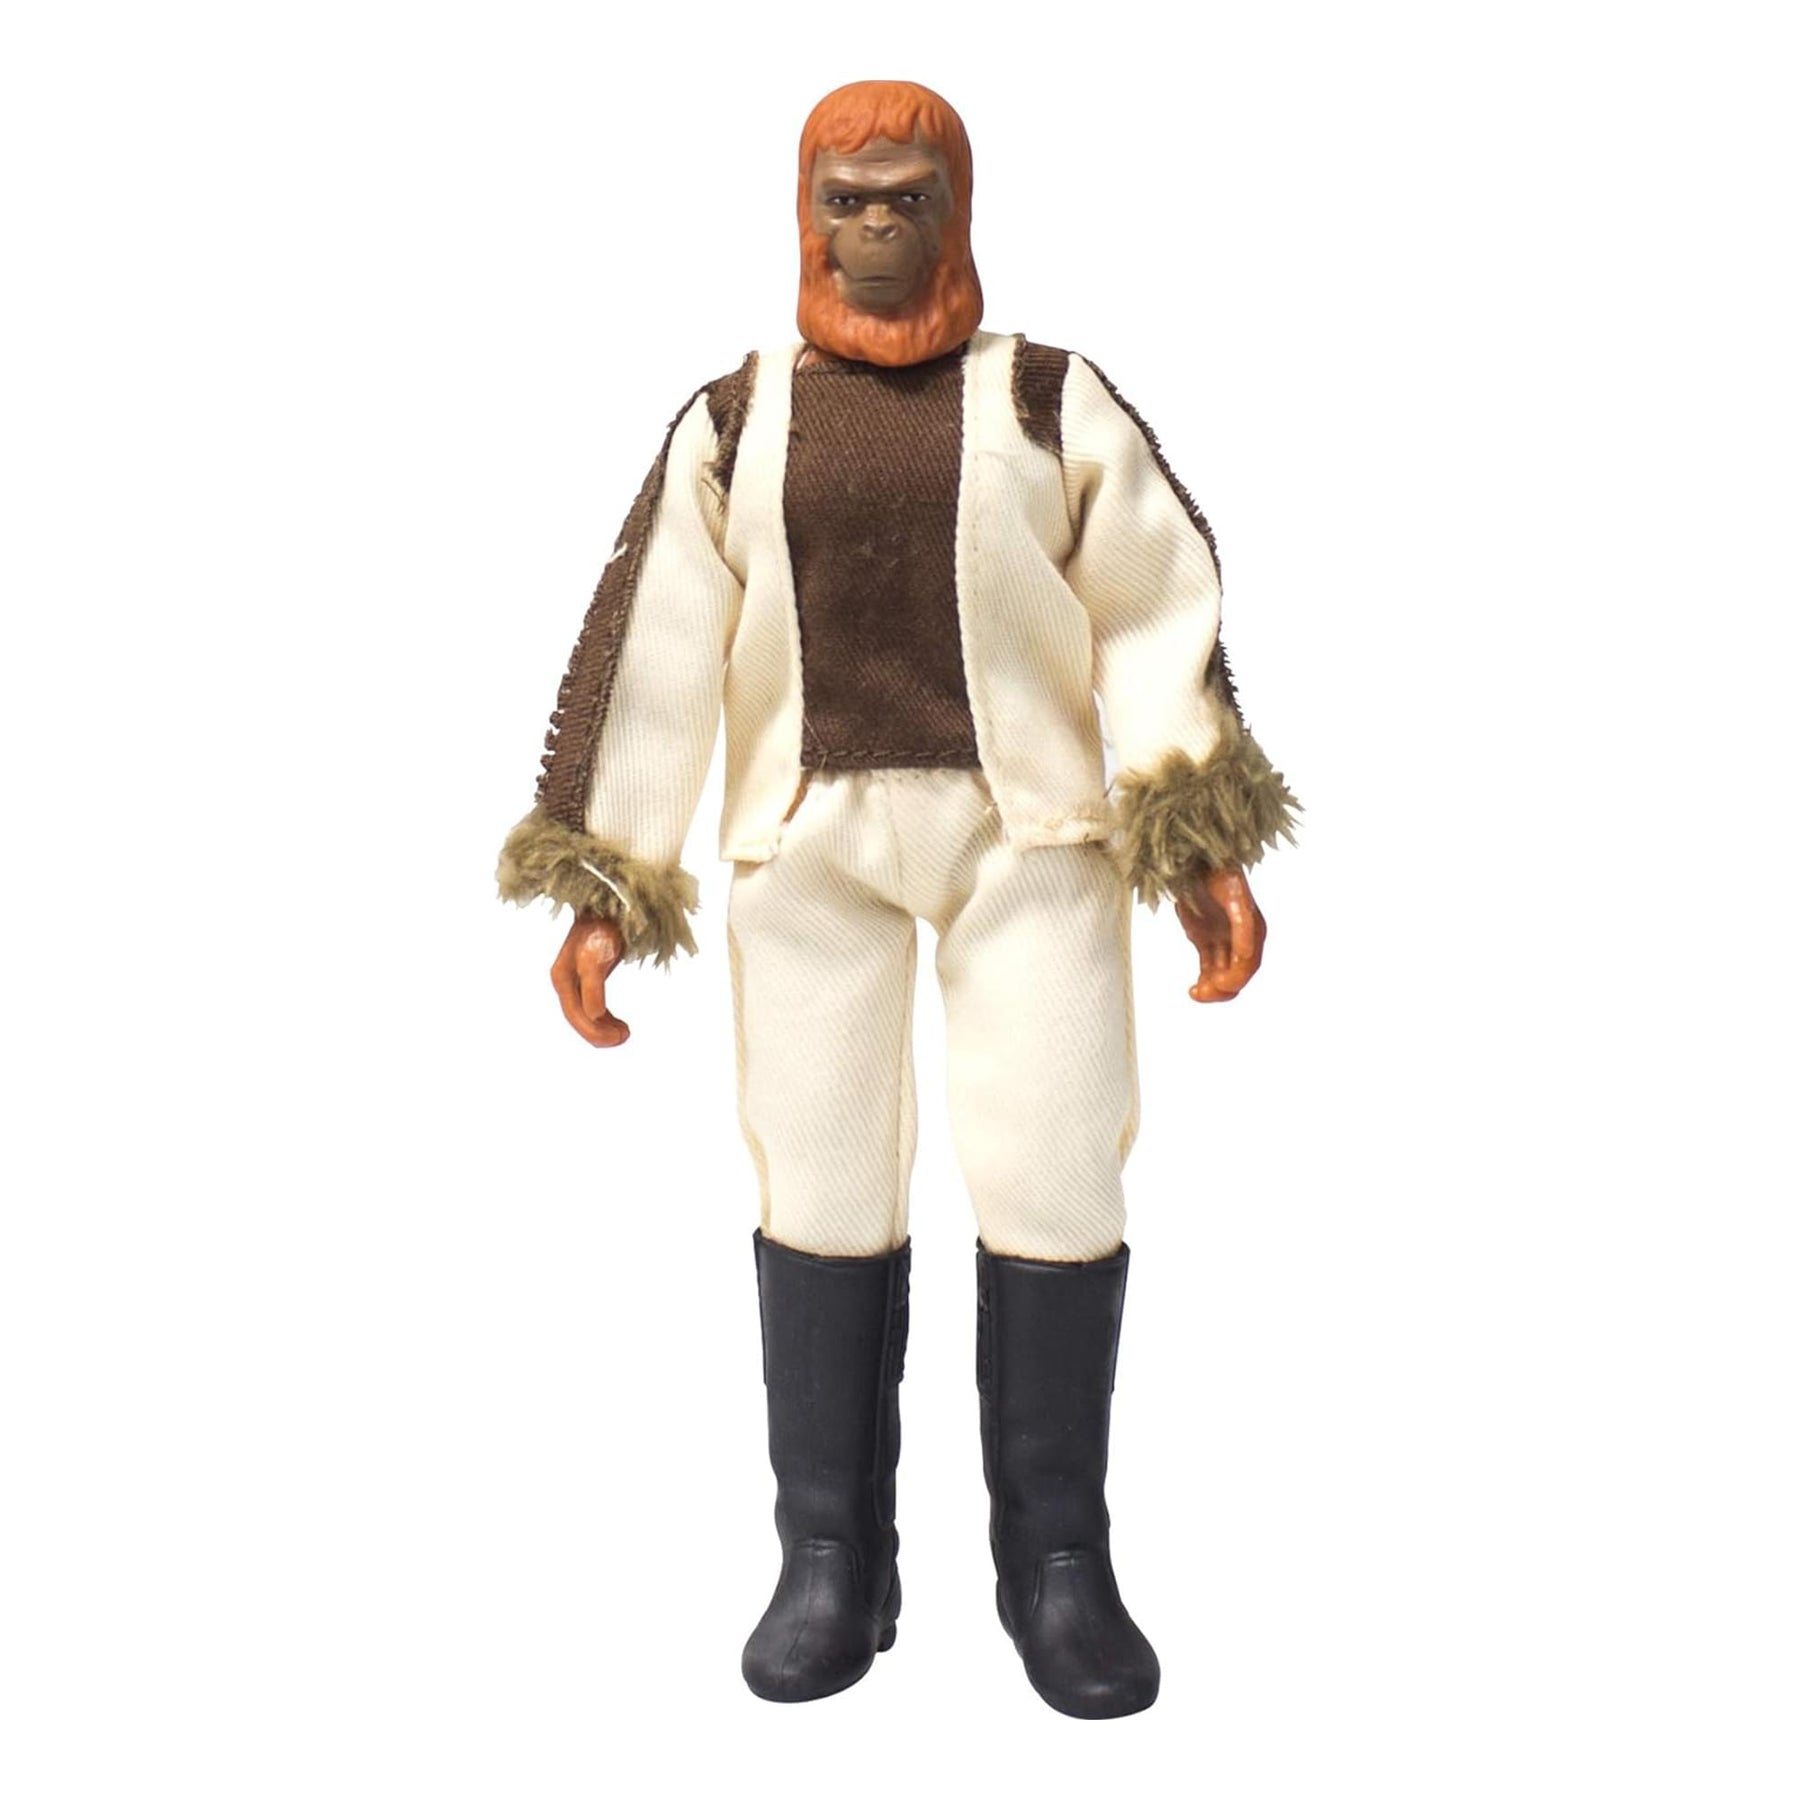 Mego Planet of the Apes Dr. Zaius 8 Inch Action Figure